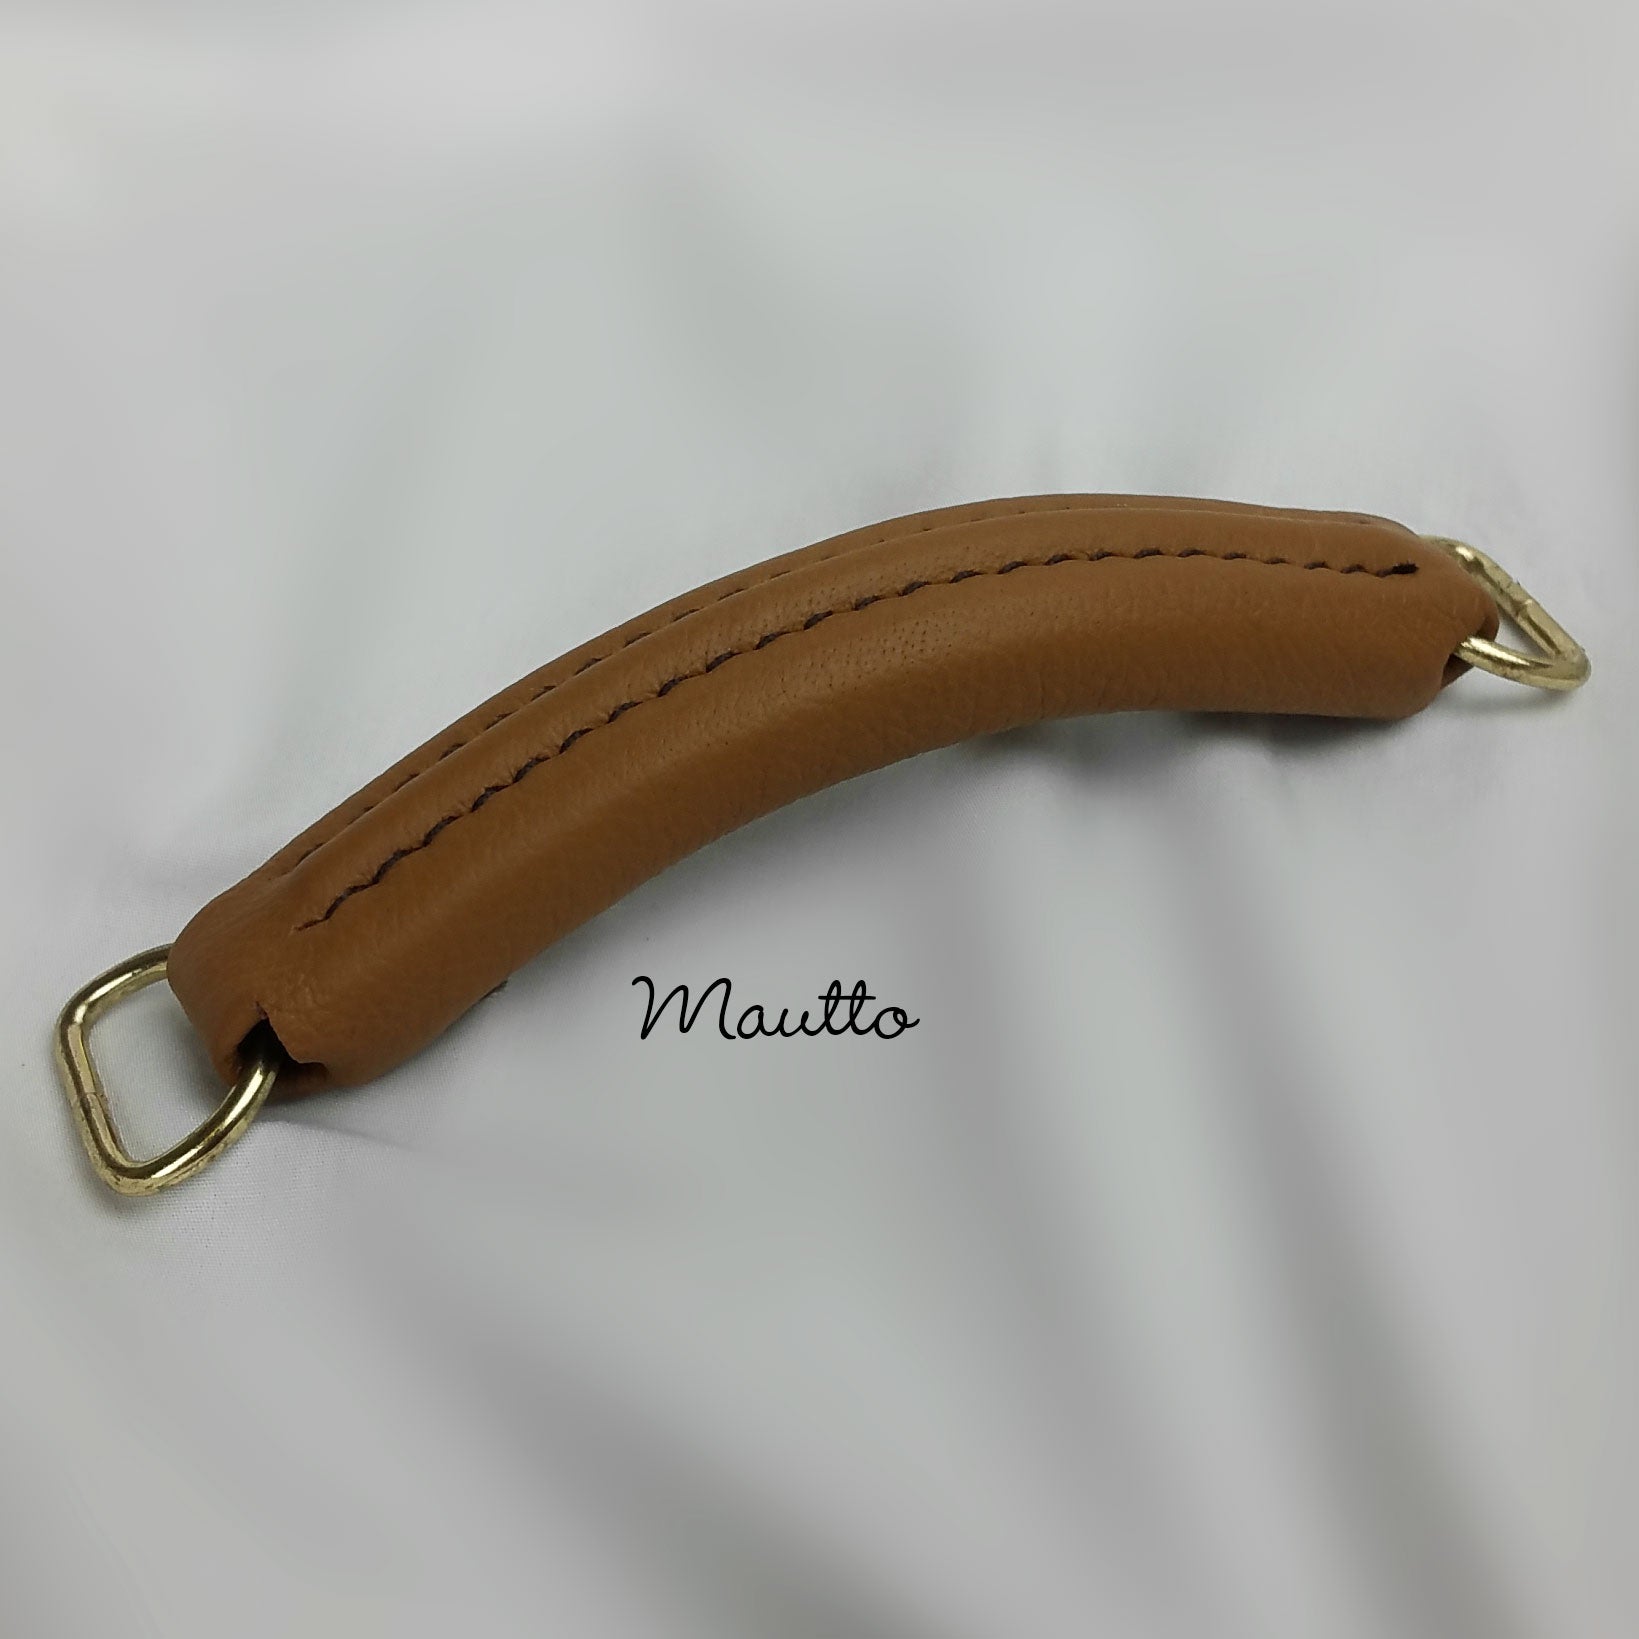 Leather Top Handle for Luggage, Briefcase, Satchel, Laptop Bag - DIY ...